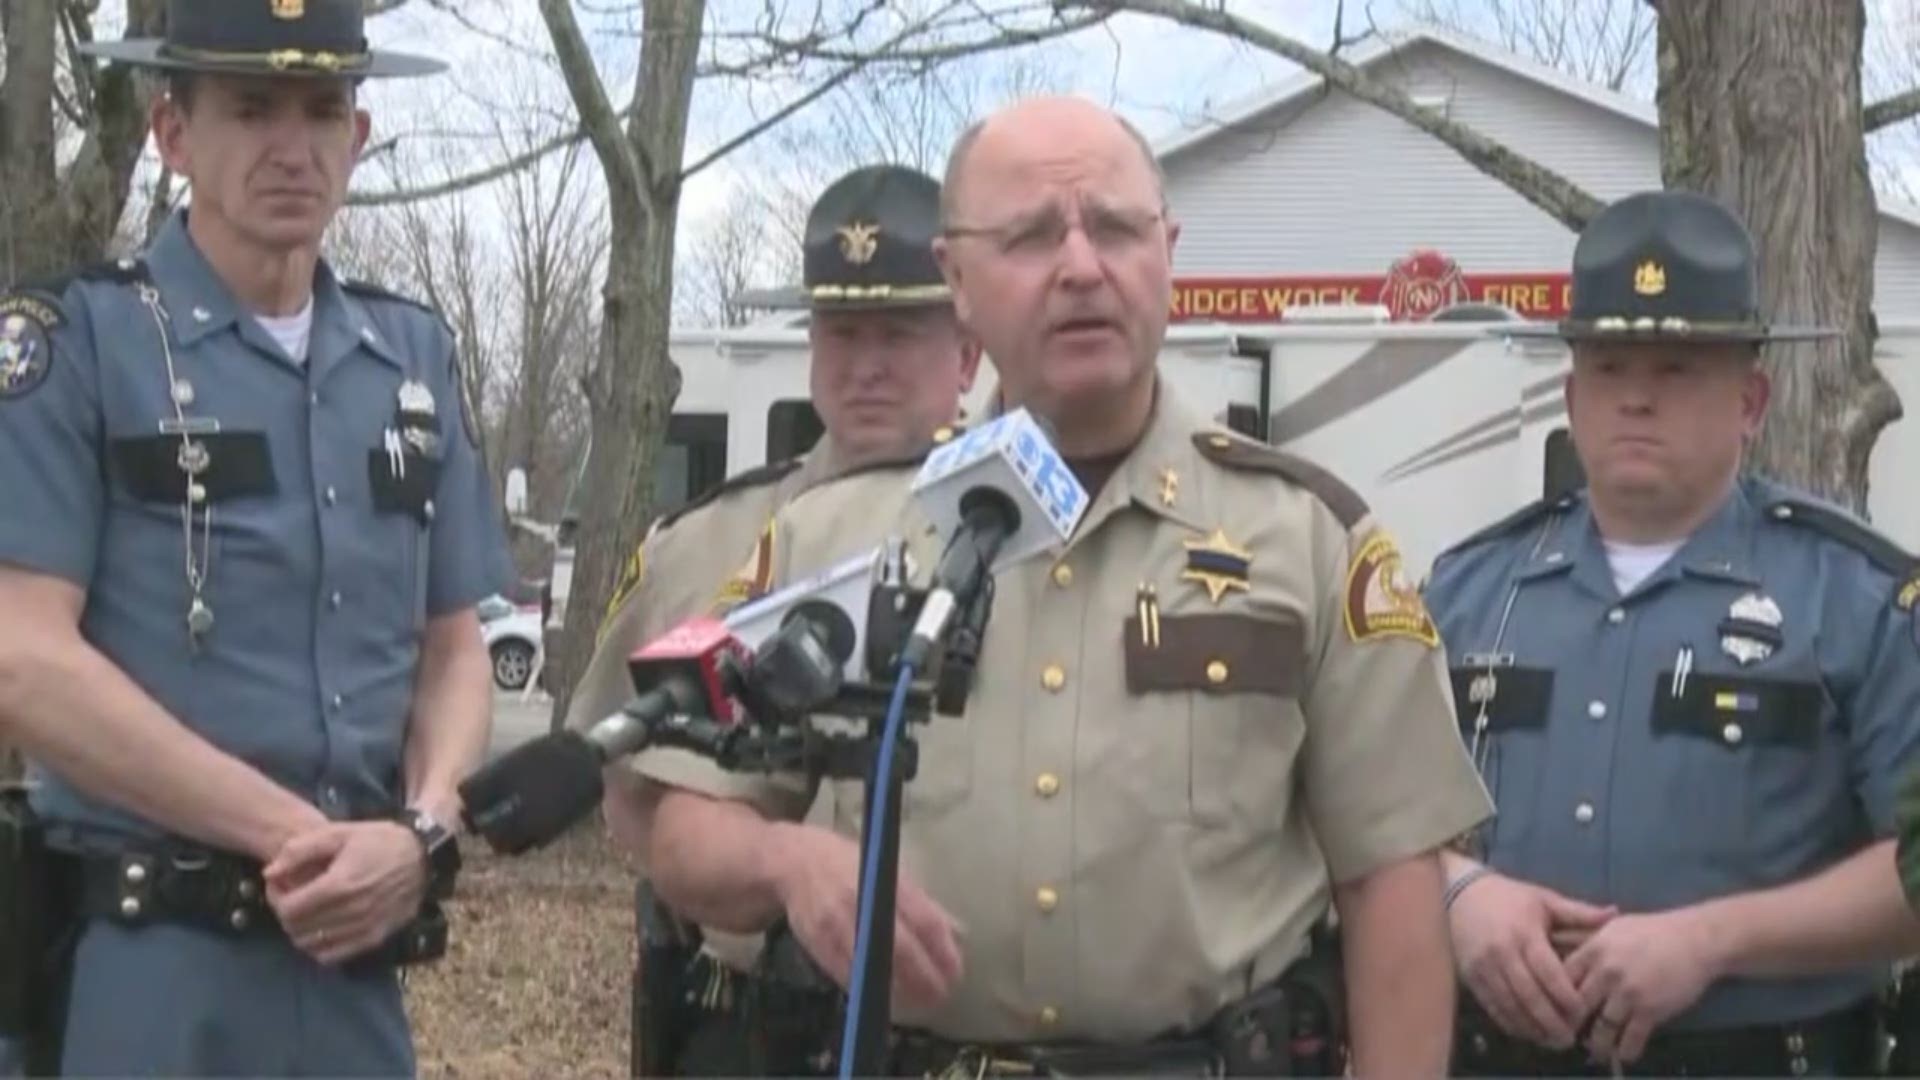 VIDEO: Police announce capture of John Williams